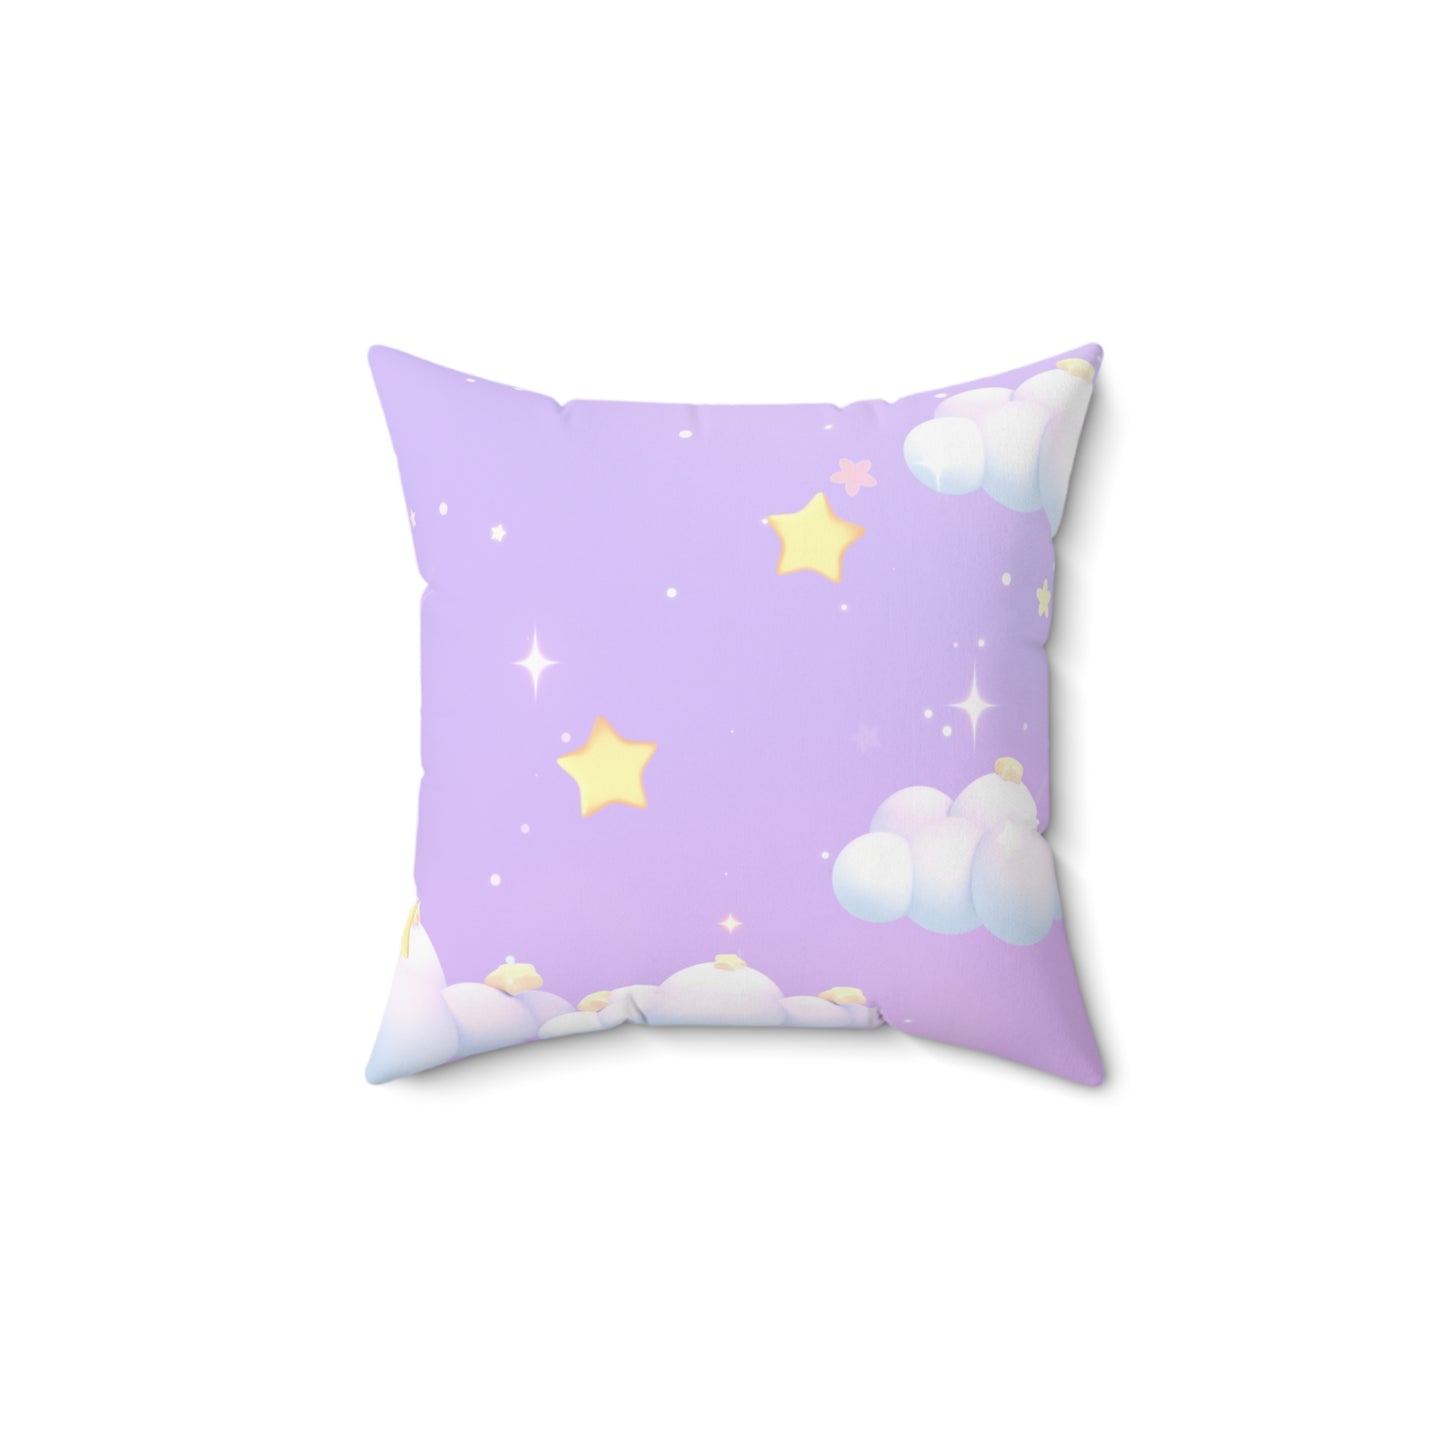 Cloudy Lavender Skies Square Pillow